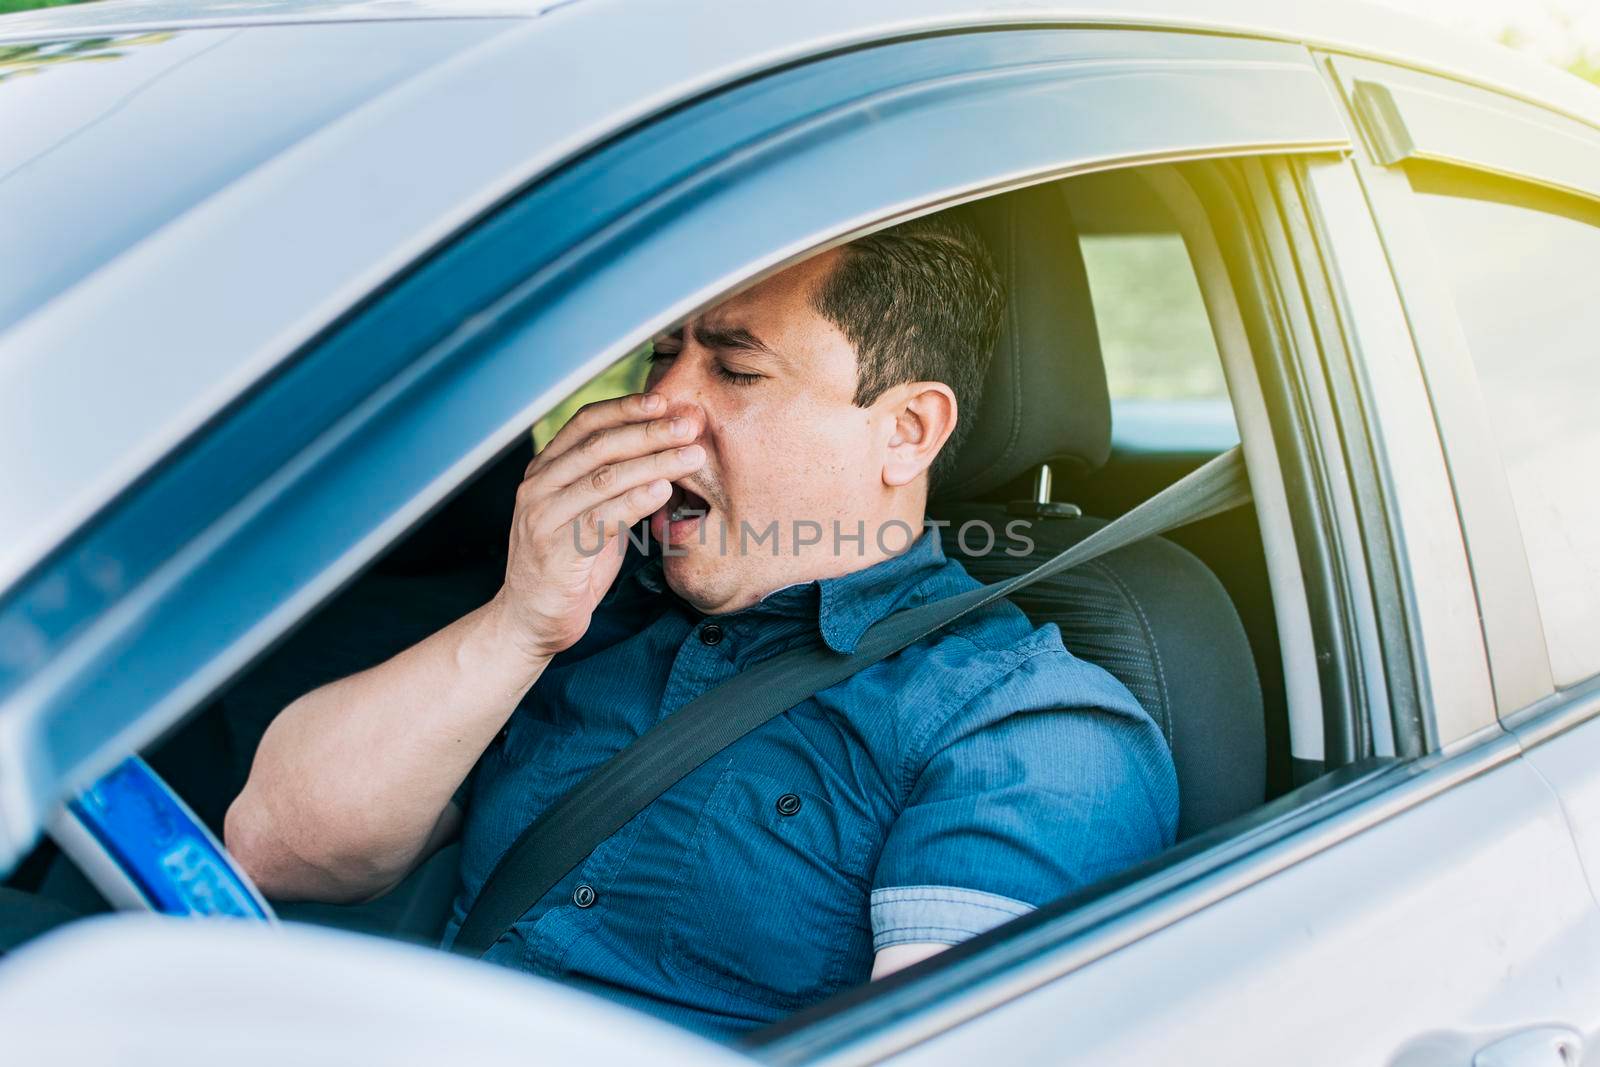 A sleepy driver at the wheel, a tired person while driving, Tired driver yawning, concept of man yawning while driving by isaiphoto